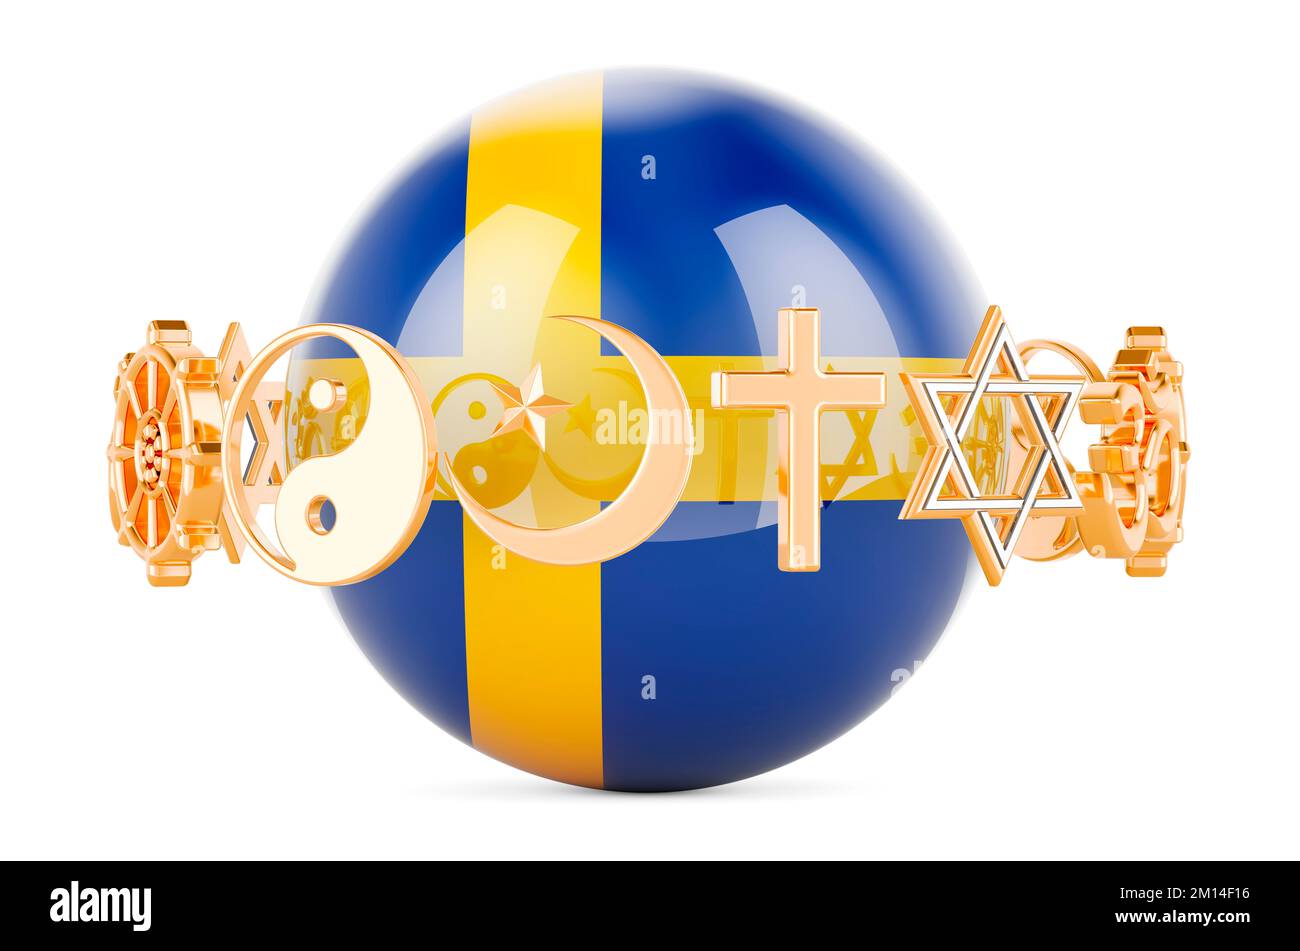 Swedish flag painted on sphere with religions symbols around, 3D rendering isolated on white background Stock Photo